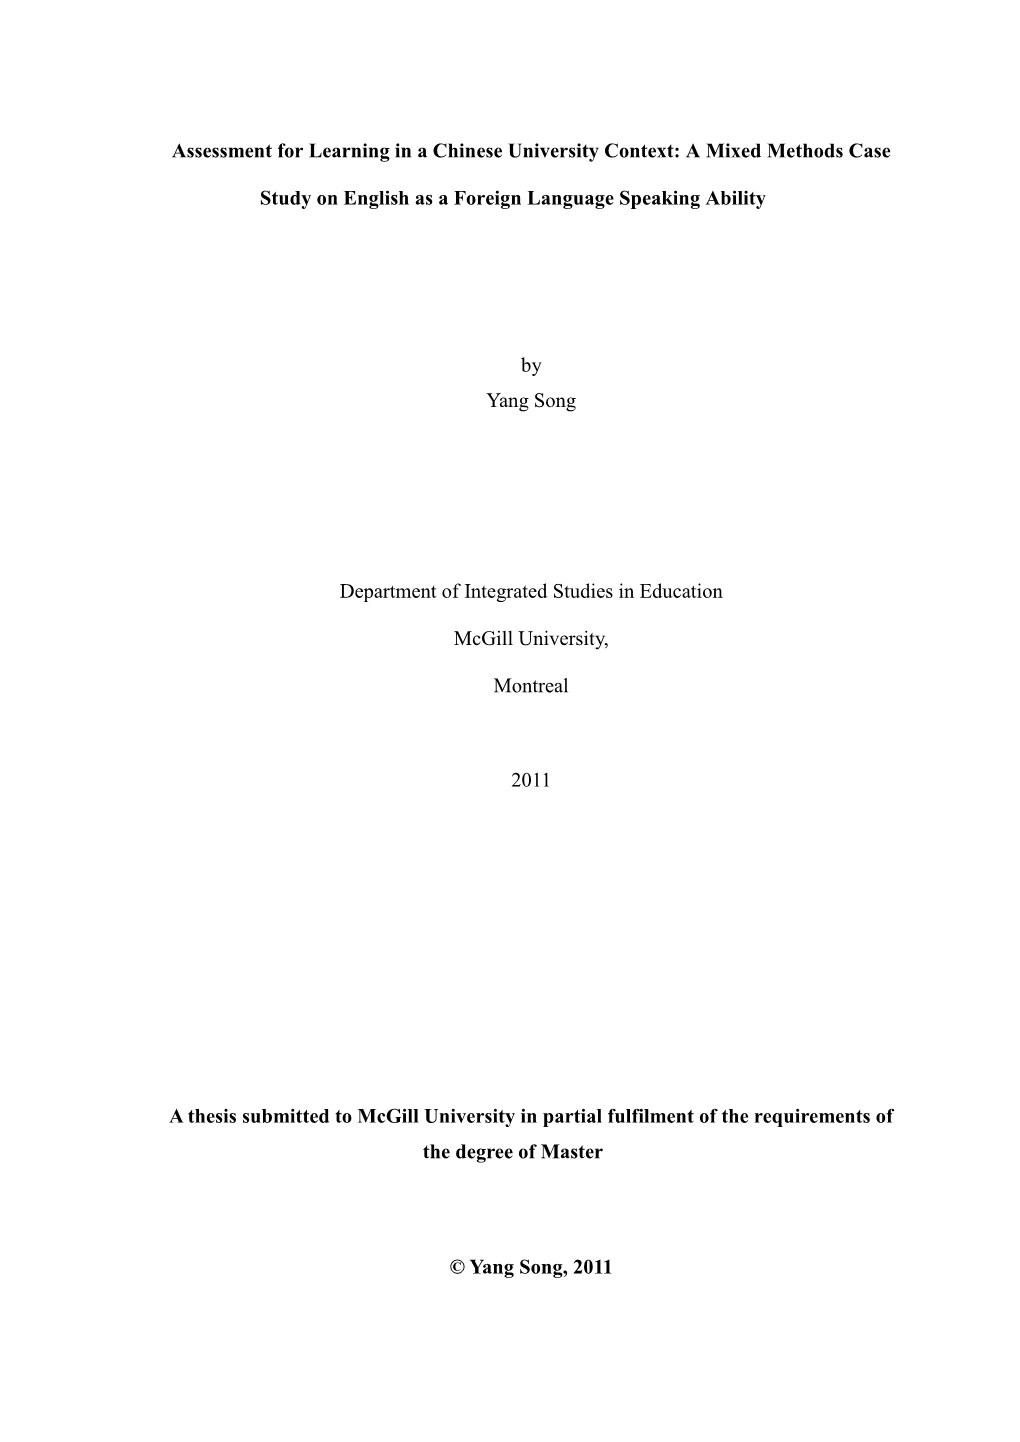 Assessment for Learning in a Chinese University Context: a Mixed Methods Case